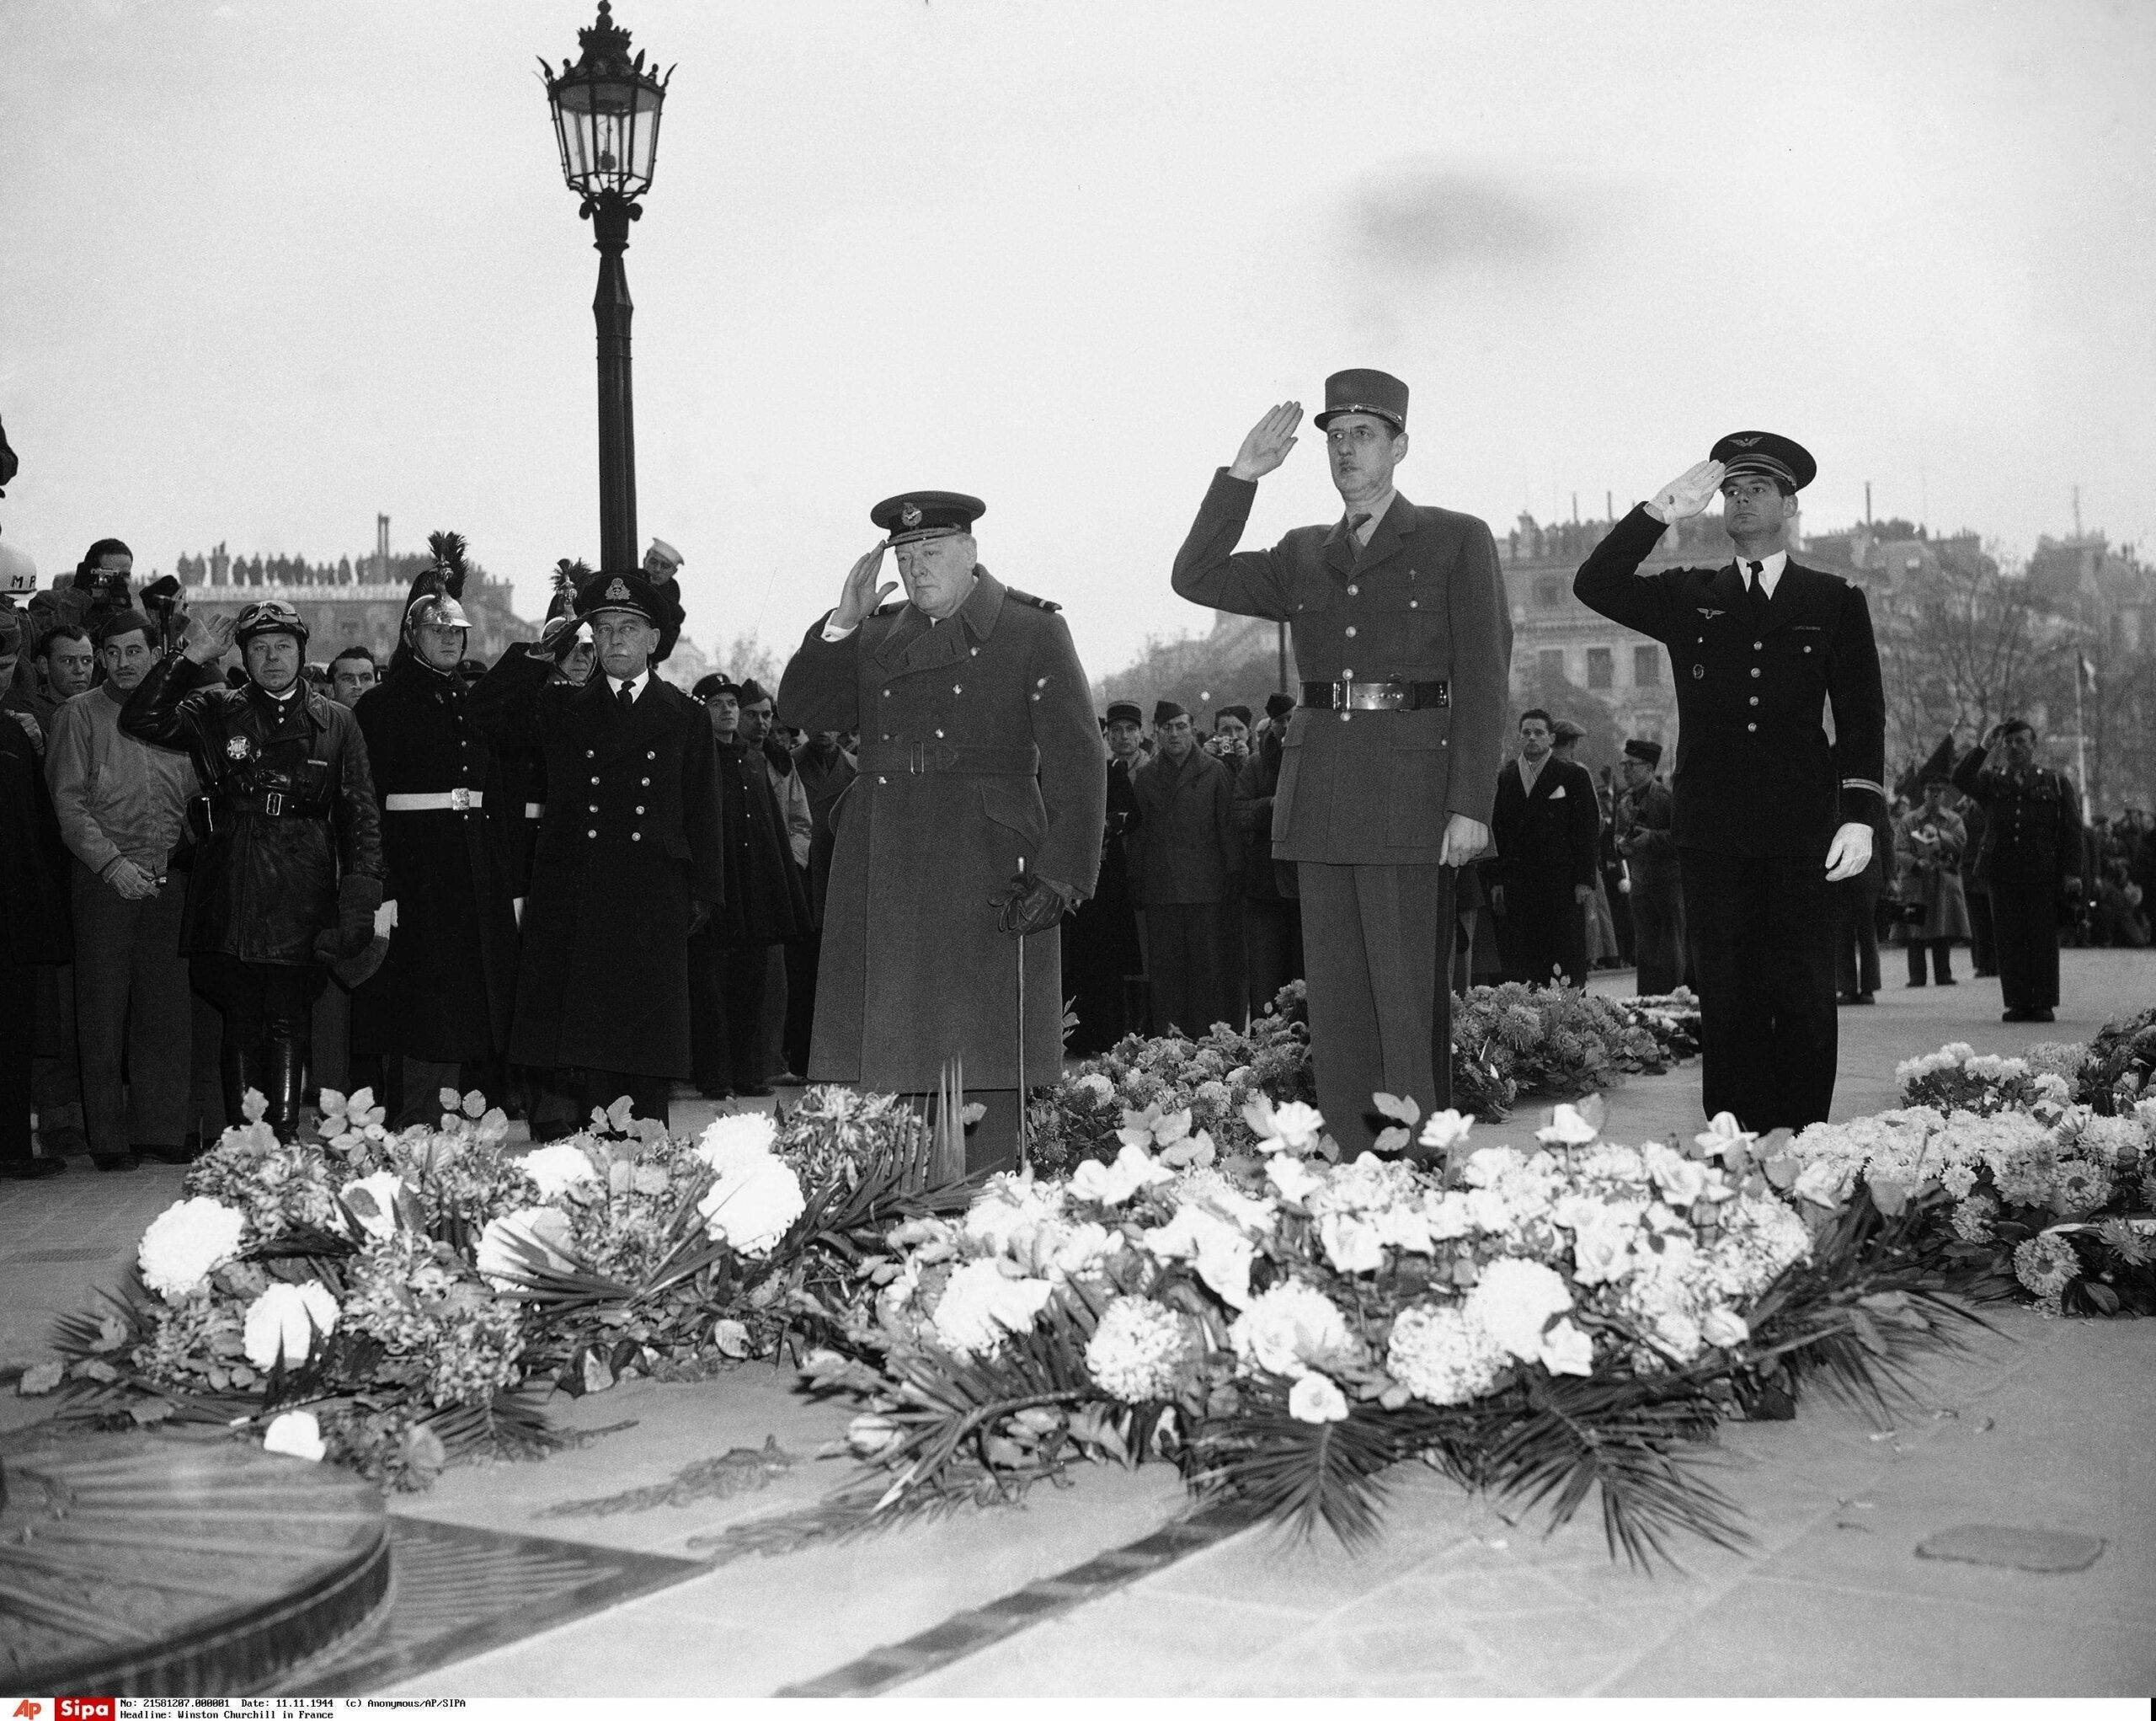 In this image provided by the United States Army Signal Corps, Prime Minister Winston Churchill, and Gen. Charles de Gaulle, French leader, salute as they paid homage to the French unknown soldier during Armistice Day ceremonies in Paris on Nov. 11, 1944. Others in picture not identified. (AP Photo/United States Army Signal Corps)/APHS394255/AP441111191/25299 - AP PROVIDES ACCESS TO THIS PUBLICLY DISTRIBUTED HANDOUT PHOTO PROVIDED BY THE UNITED STATES ARMY SIGNAL CORPS./1406121532